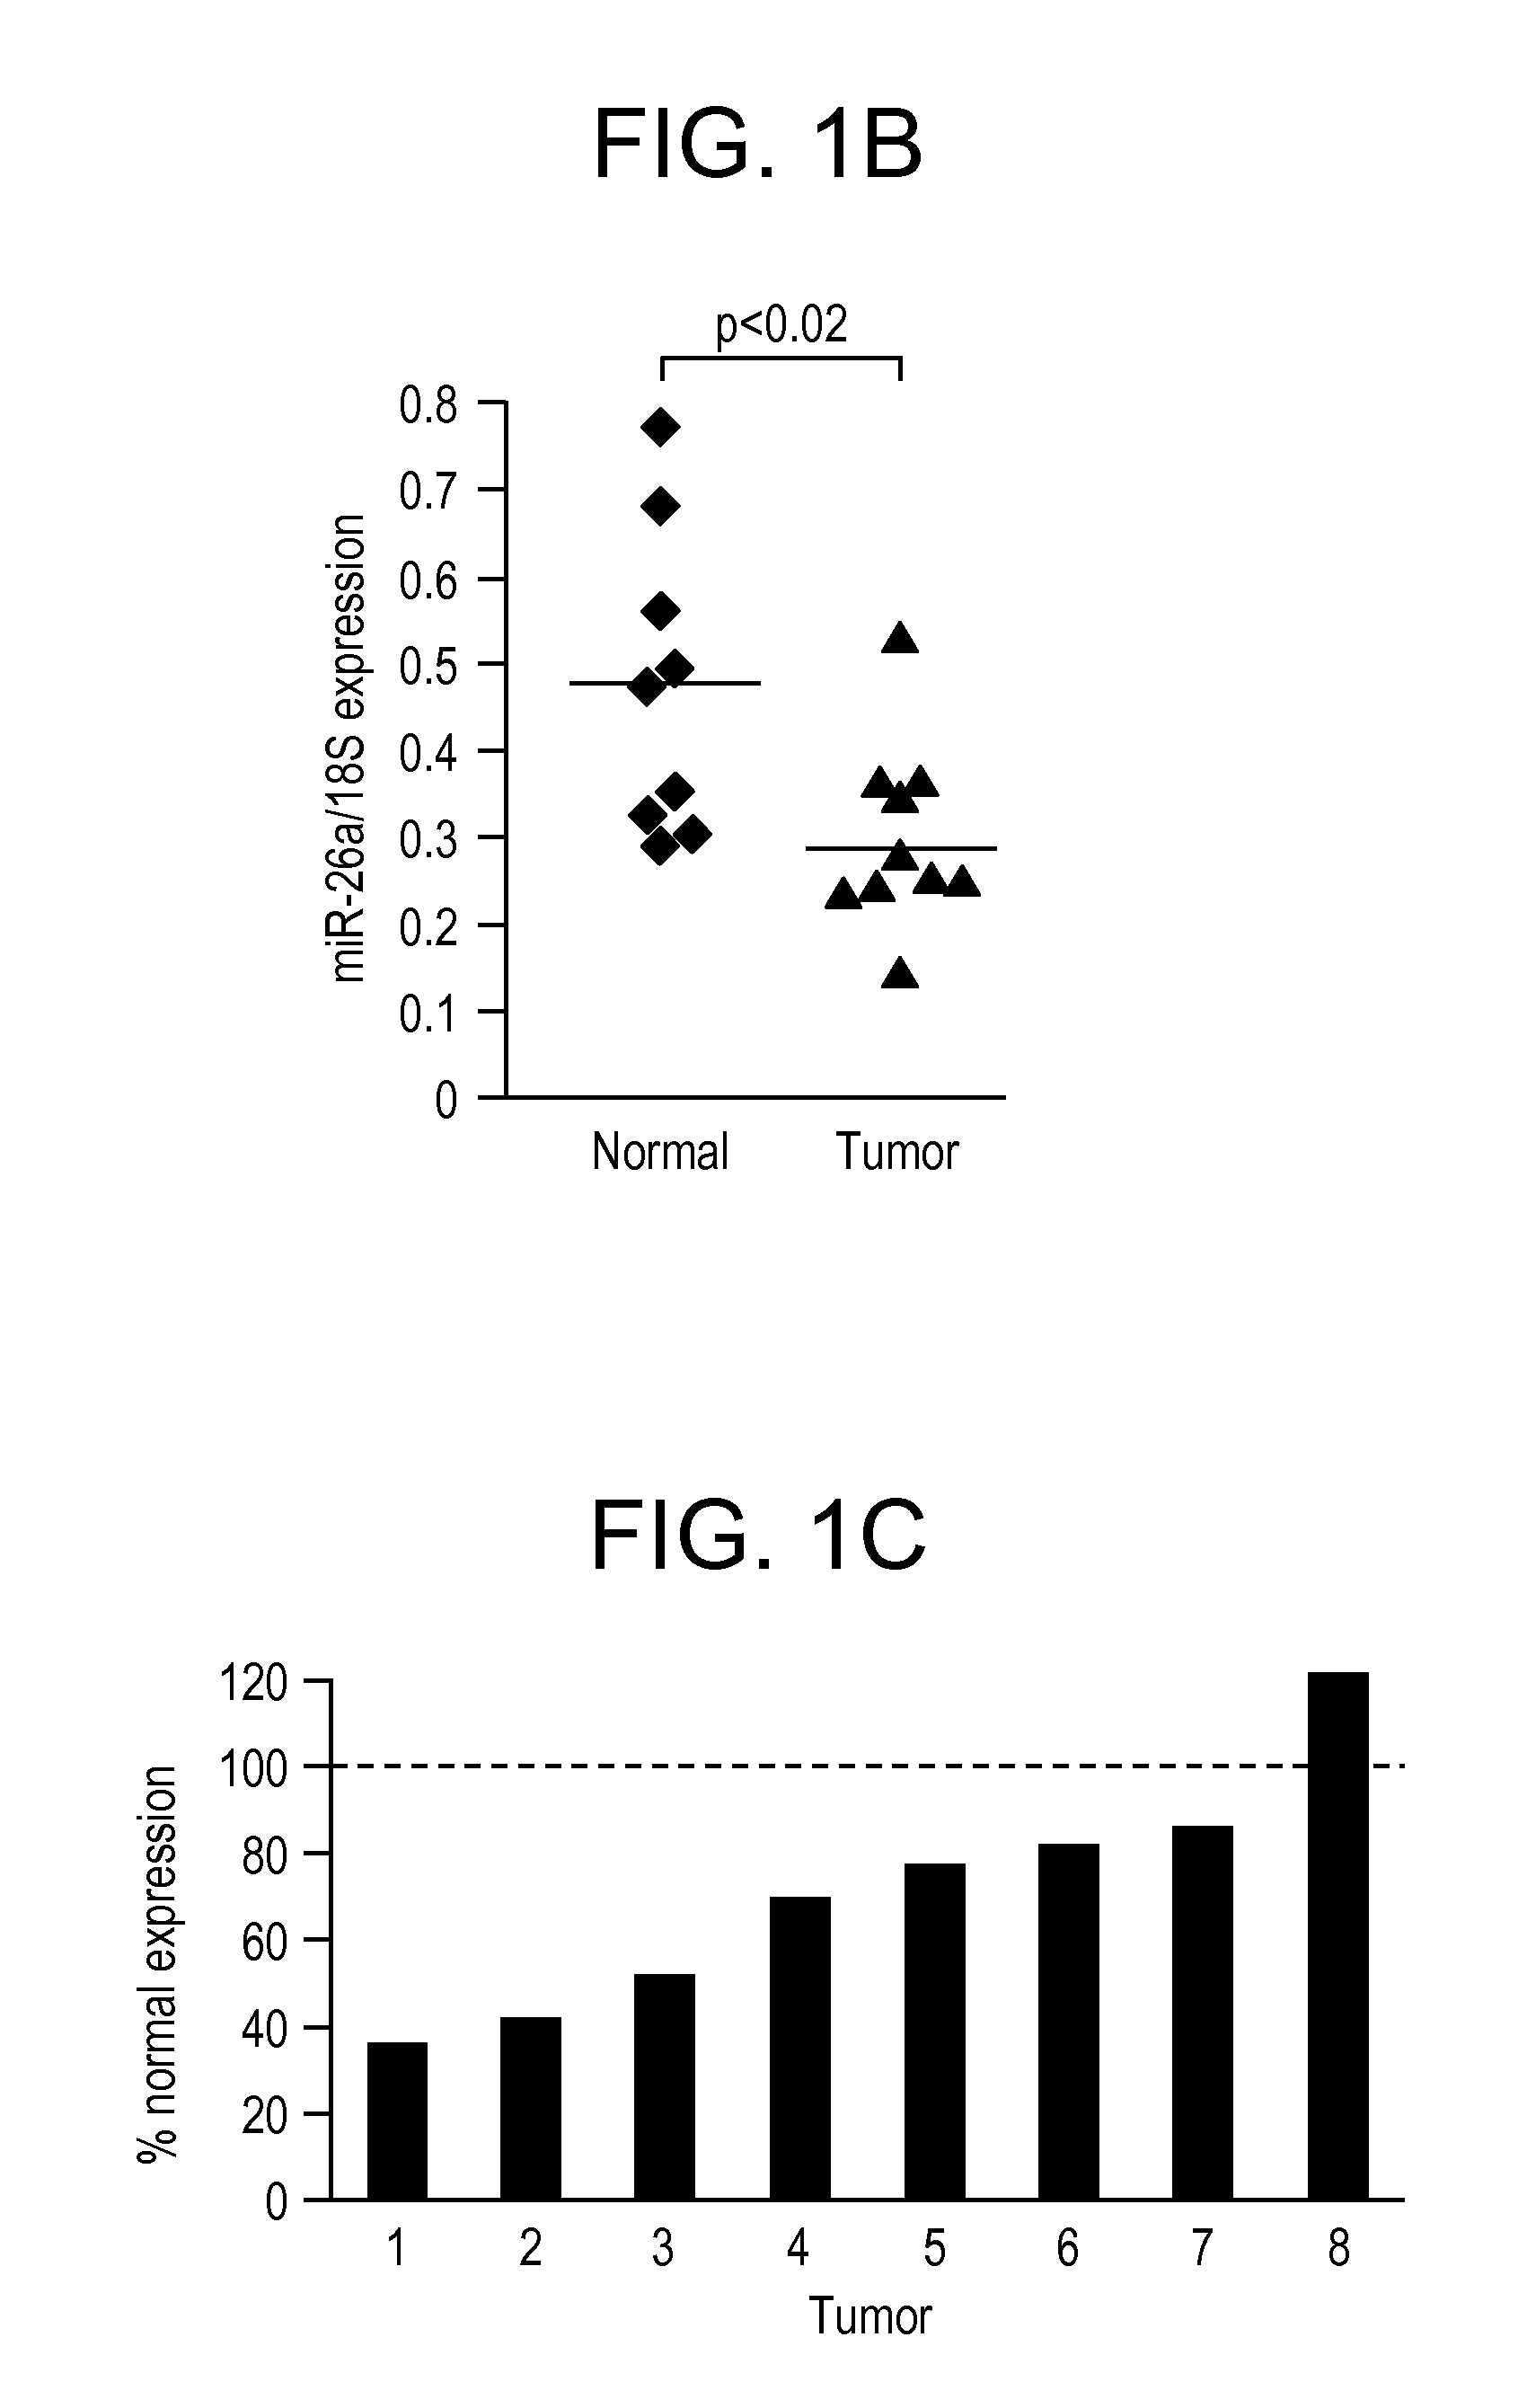 Compositions and methods for treating hepatic neoplasia